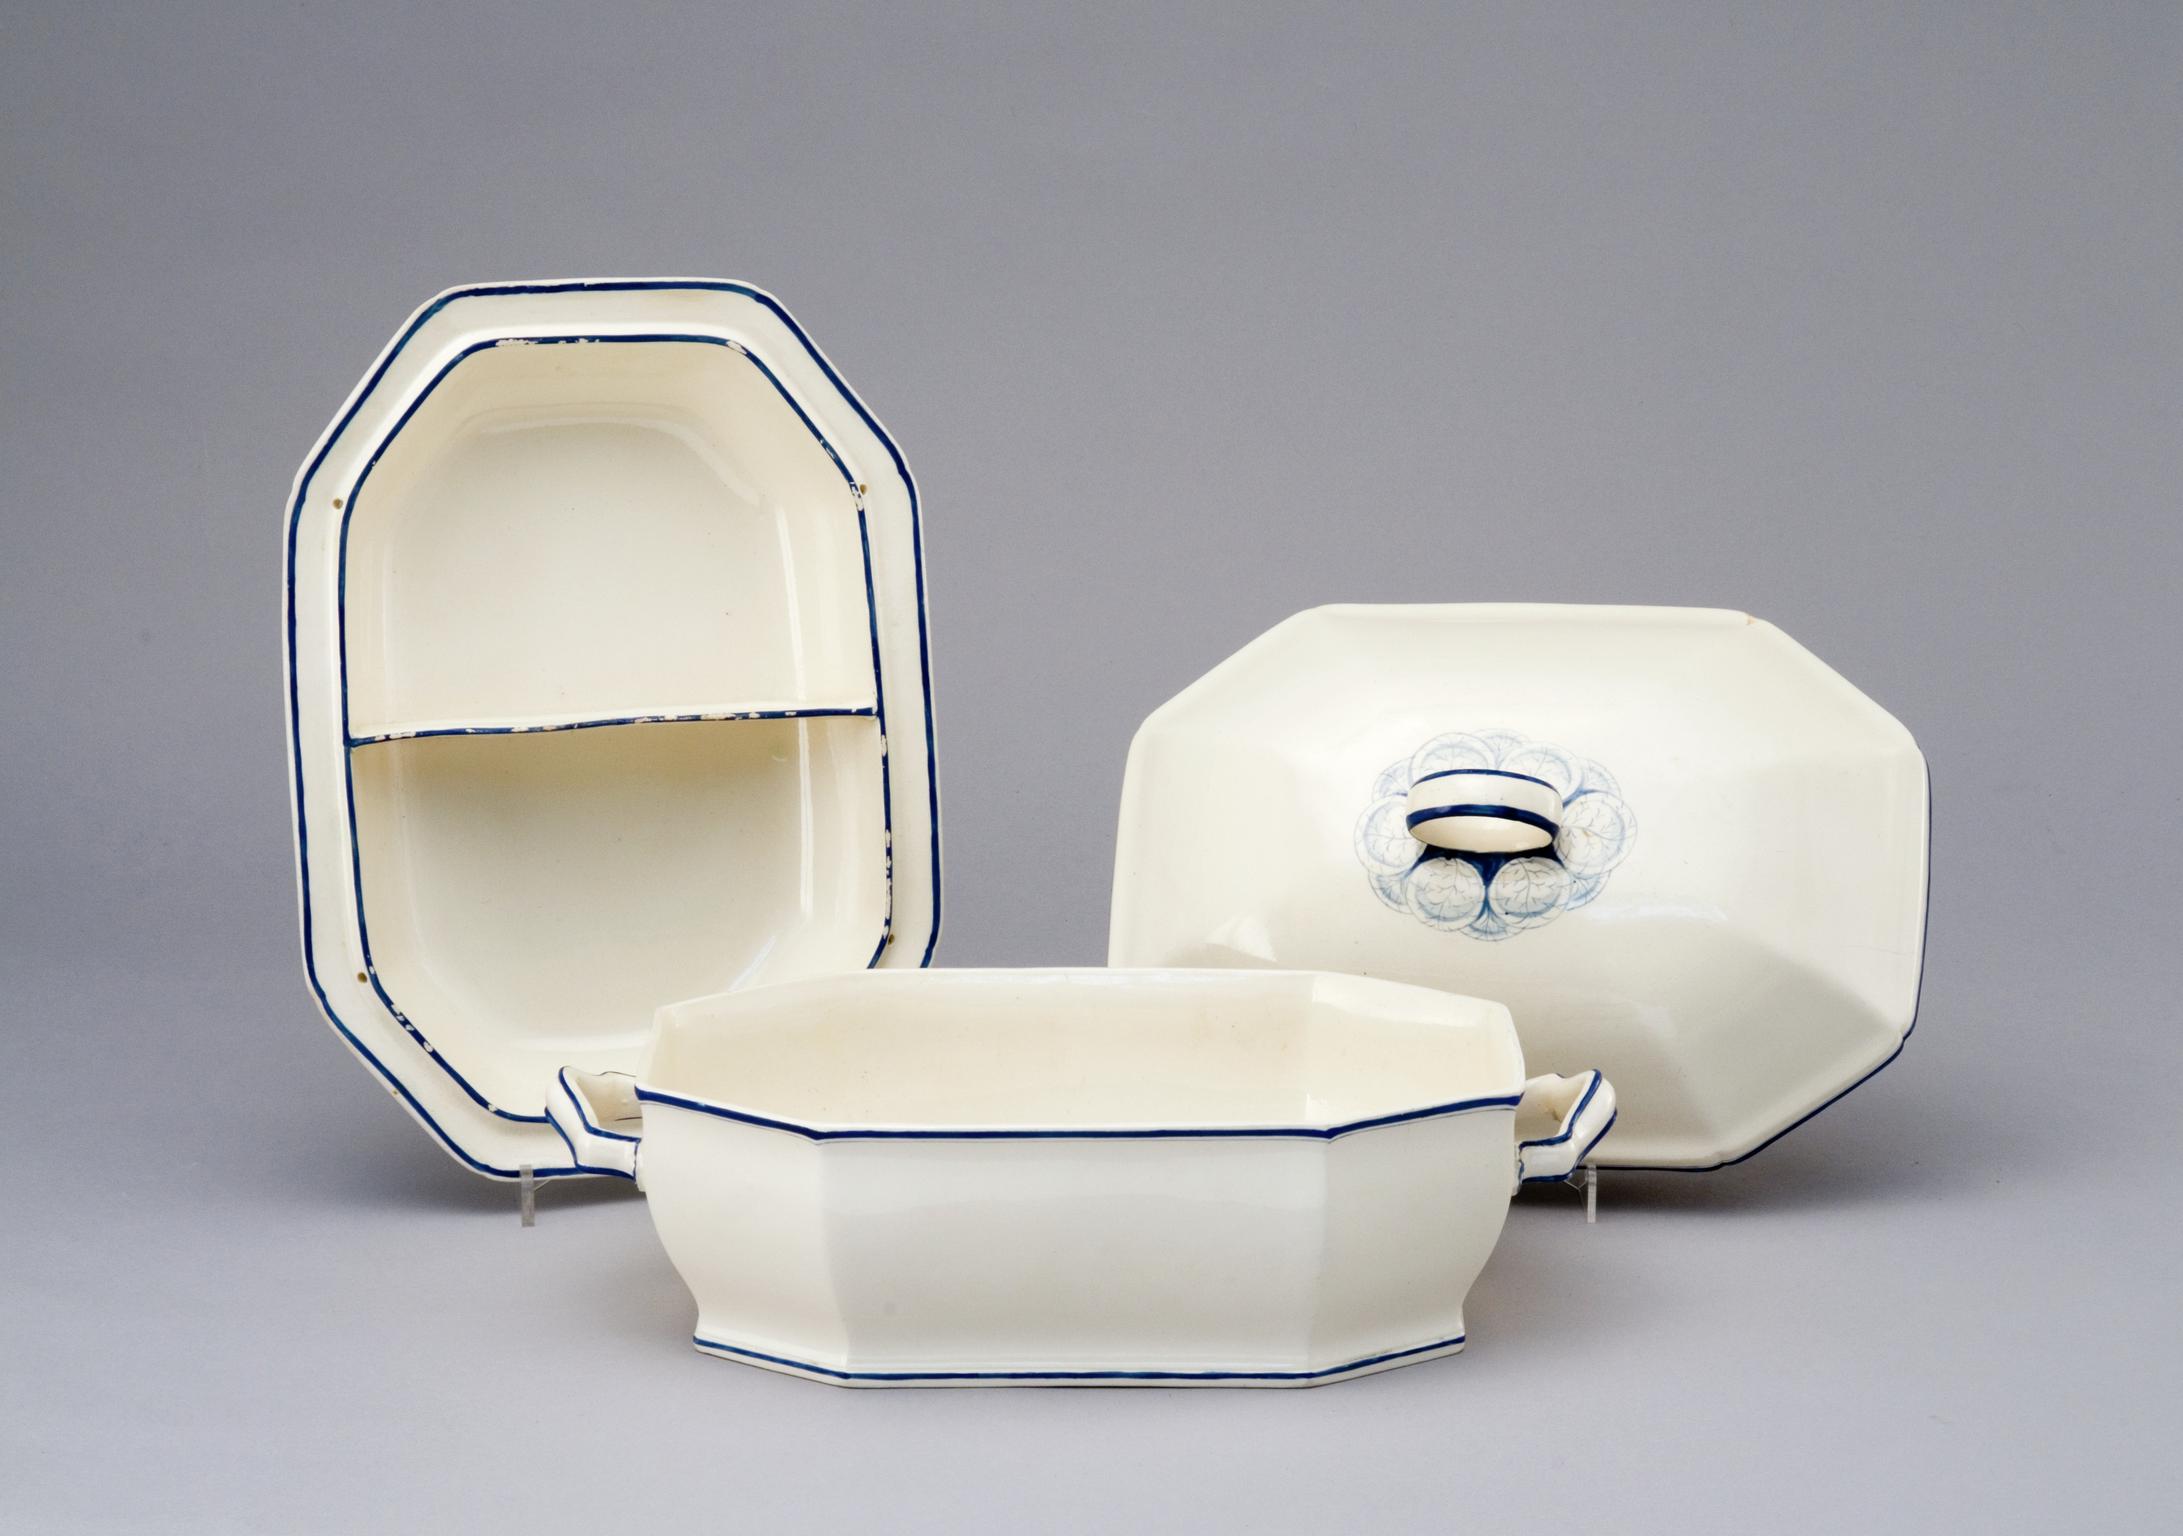 Tureen, cover and stand